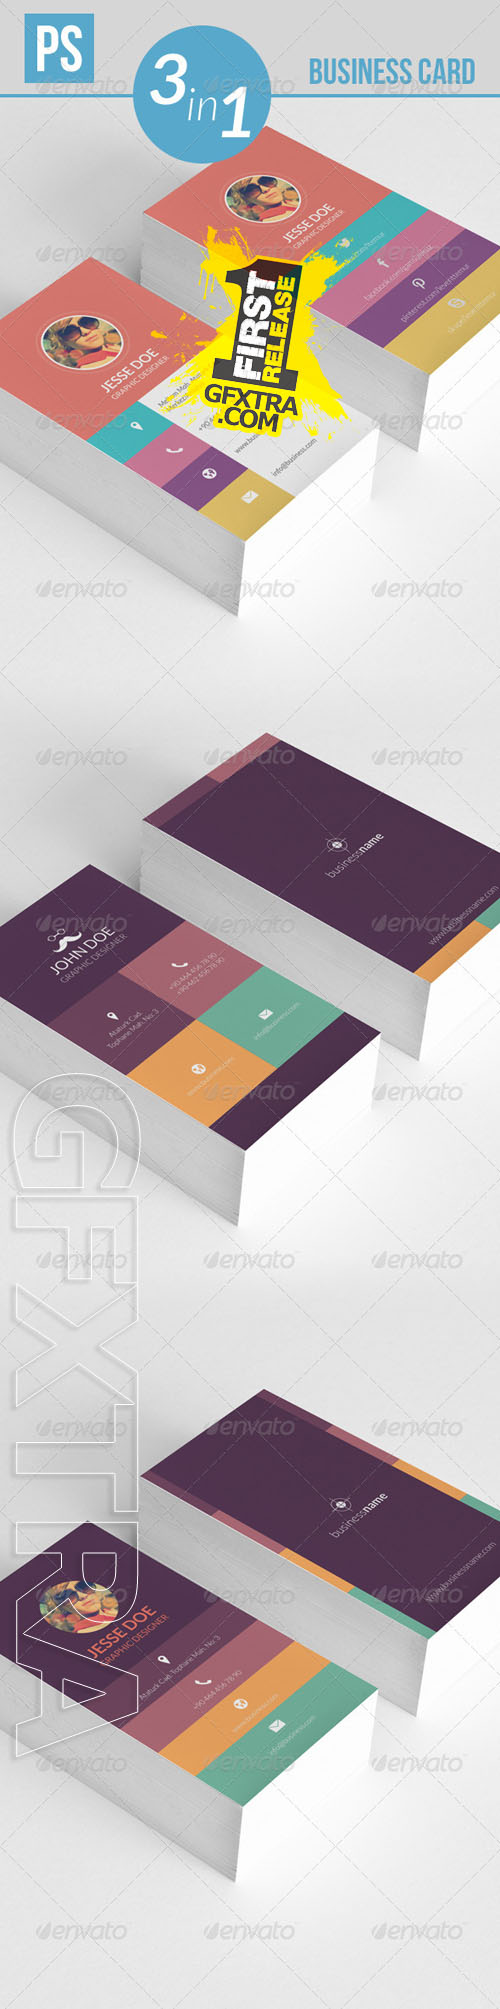 GraphicRiver - Business Card 5211795